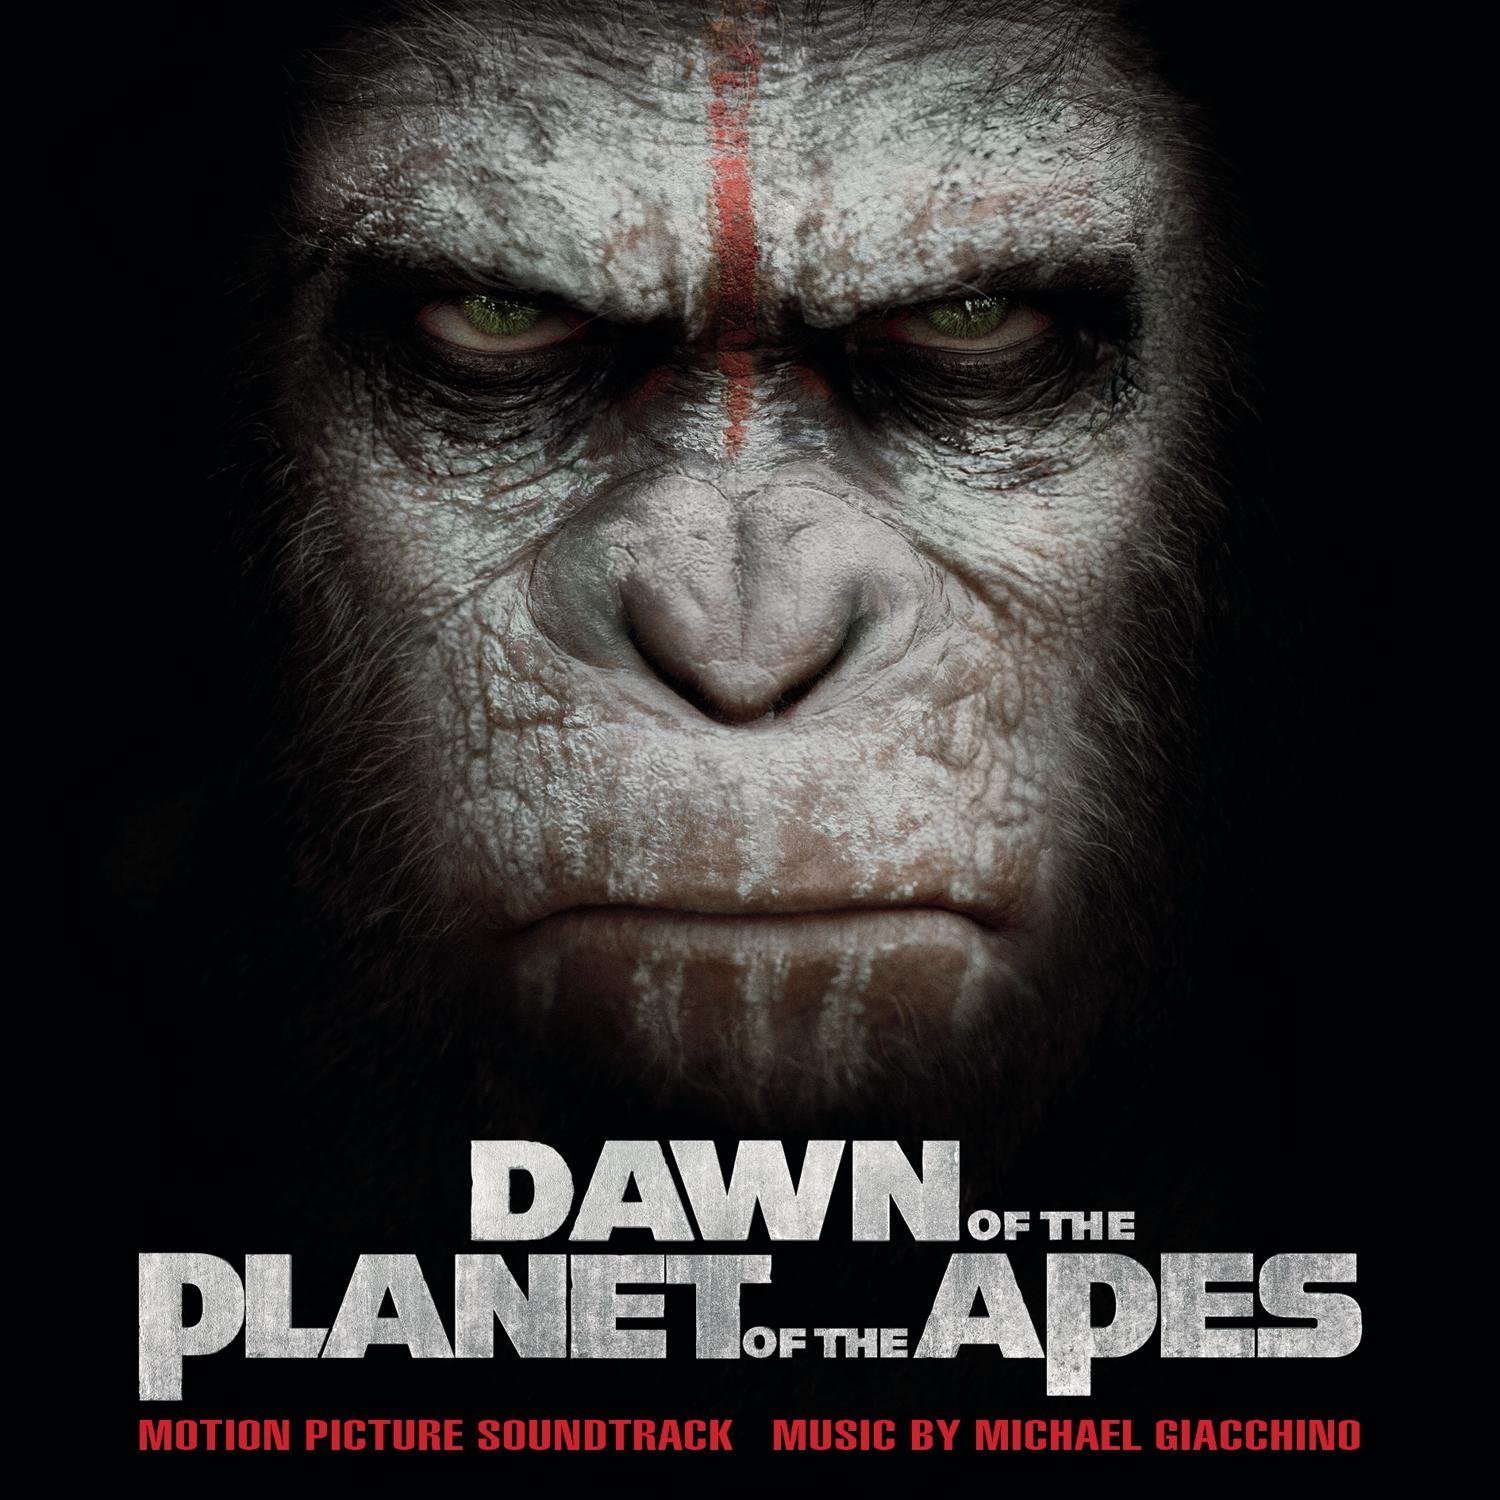 dawn-of-the-planet-of-the-apes.jpg